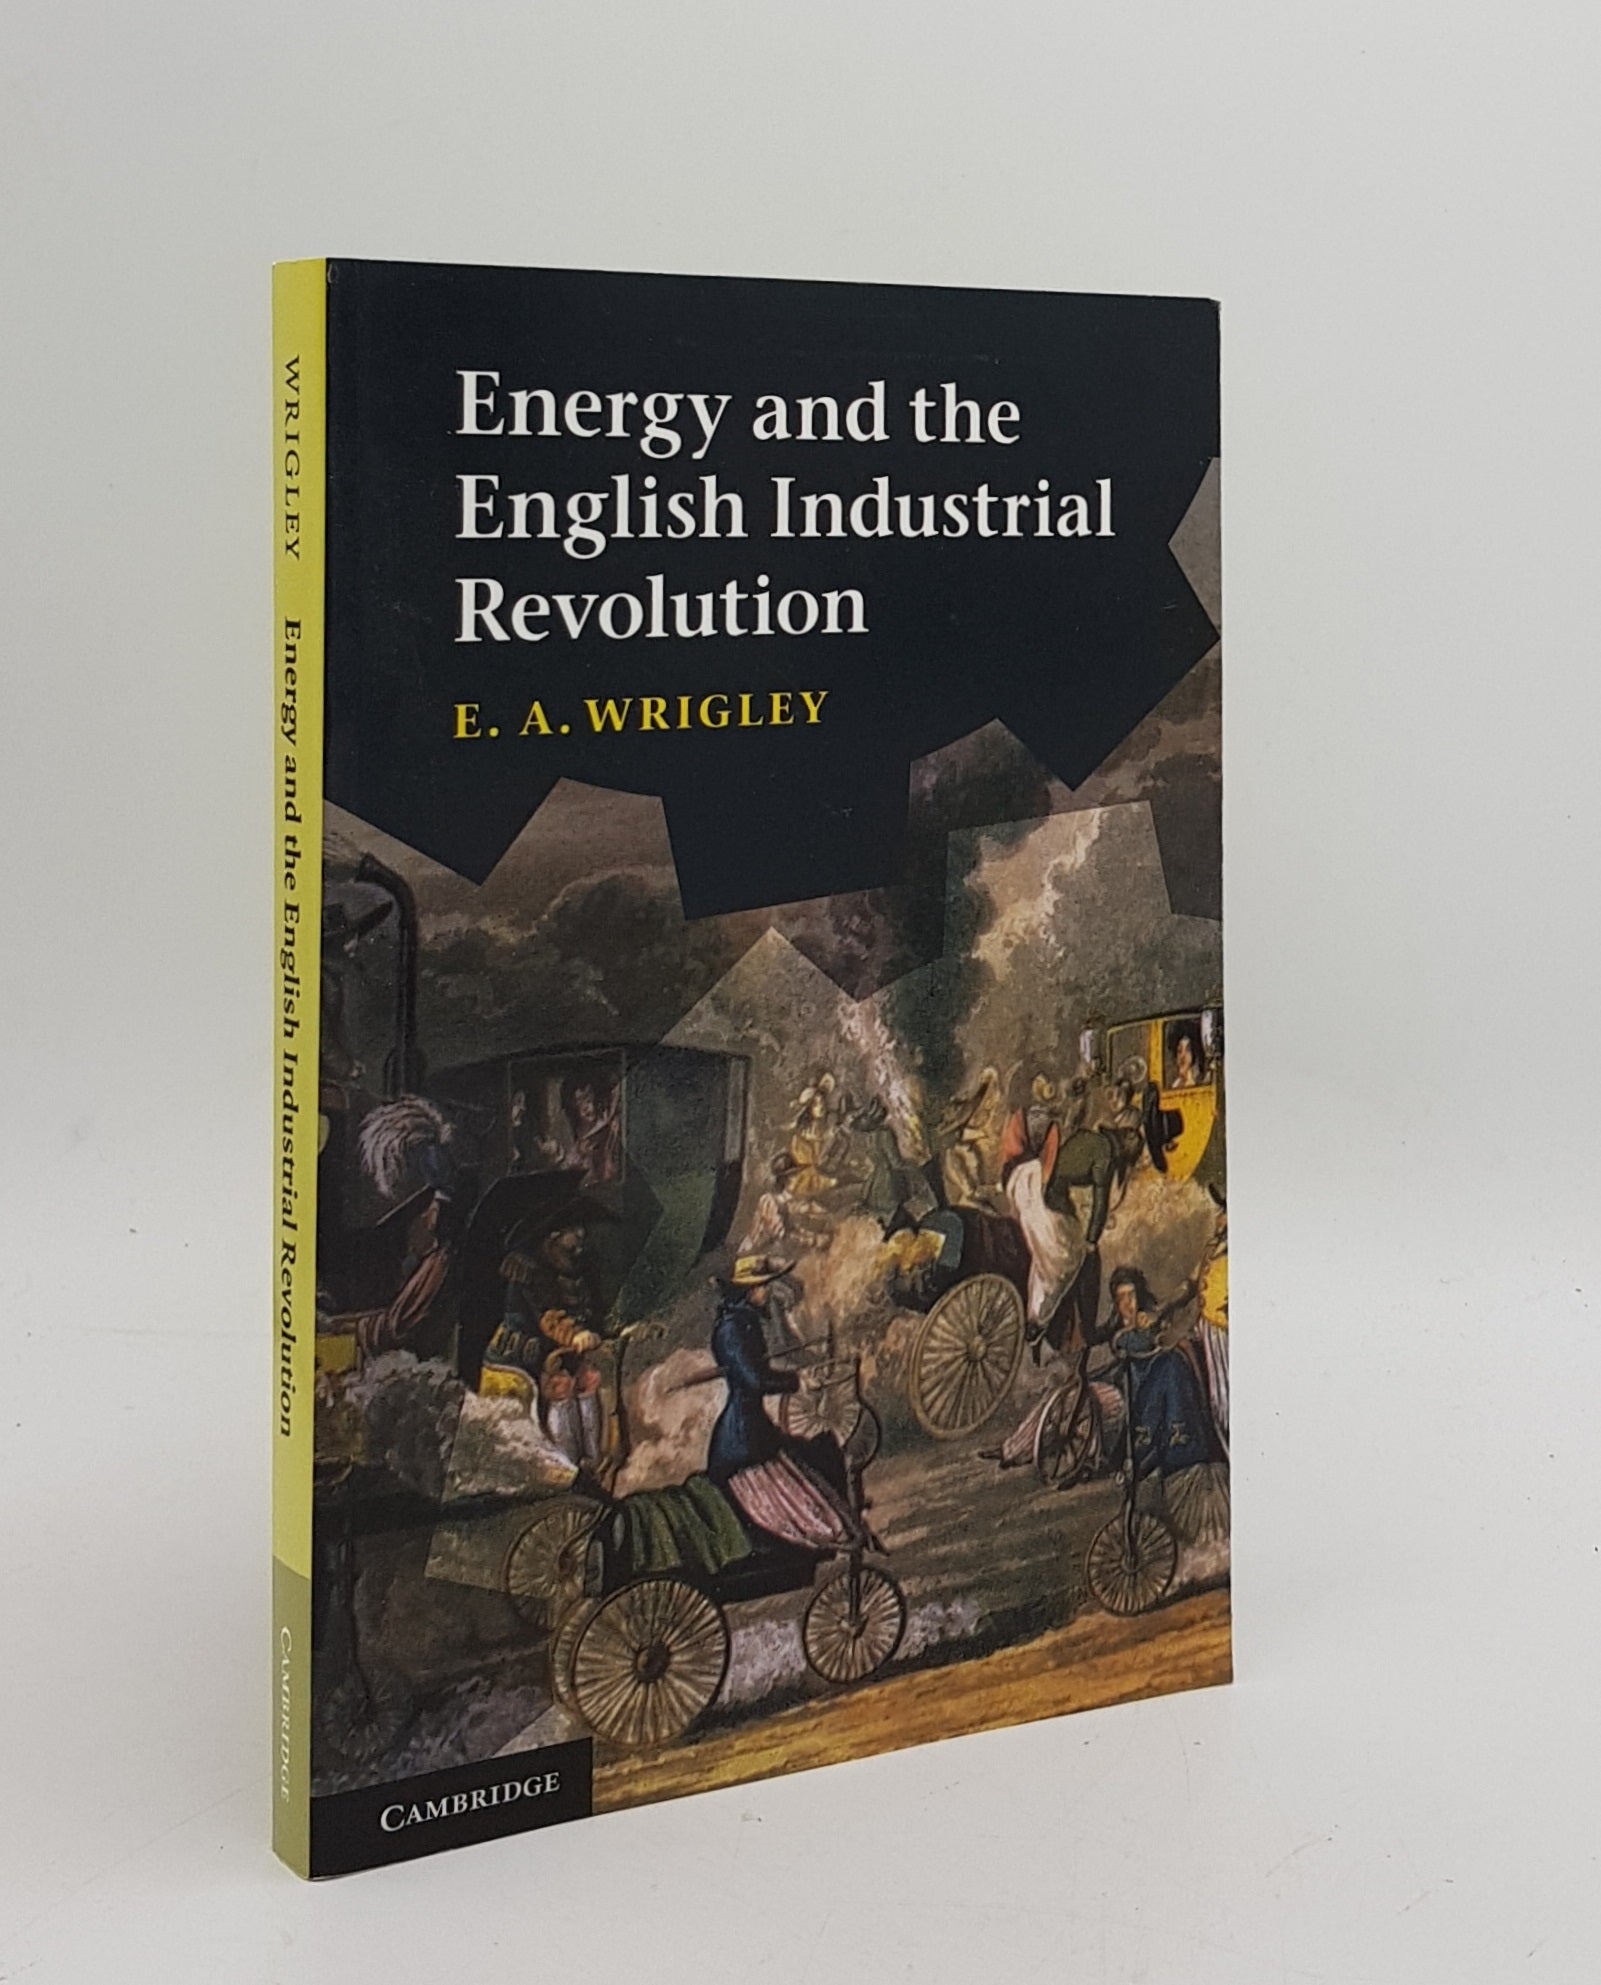 WRIGLEY E.A. - Energy and the English Industrial Revolution